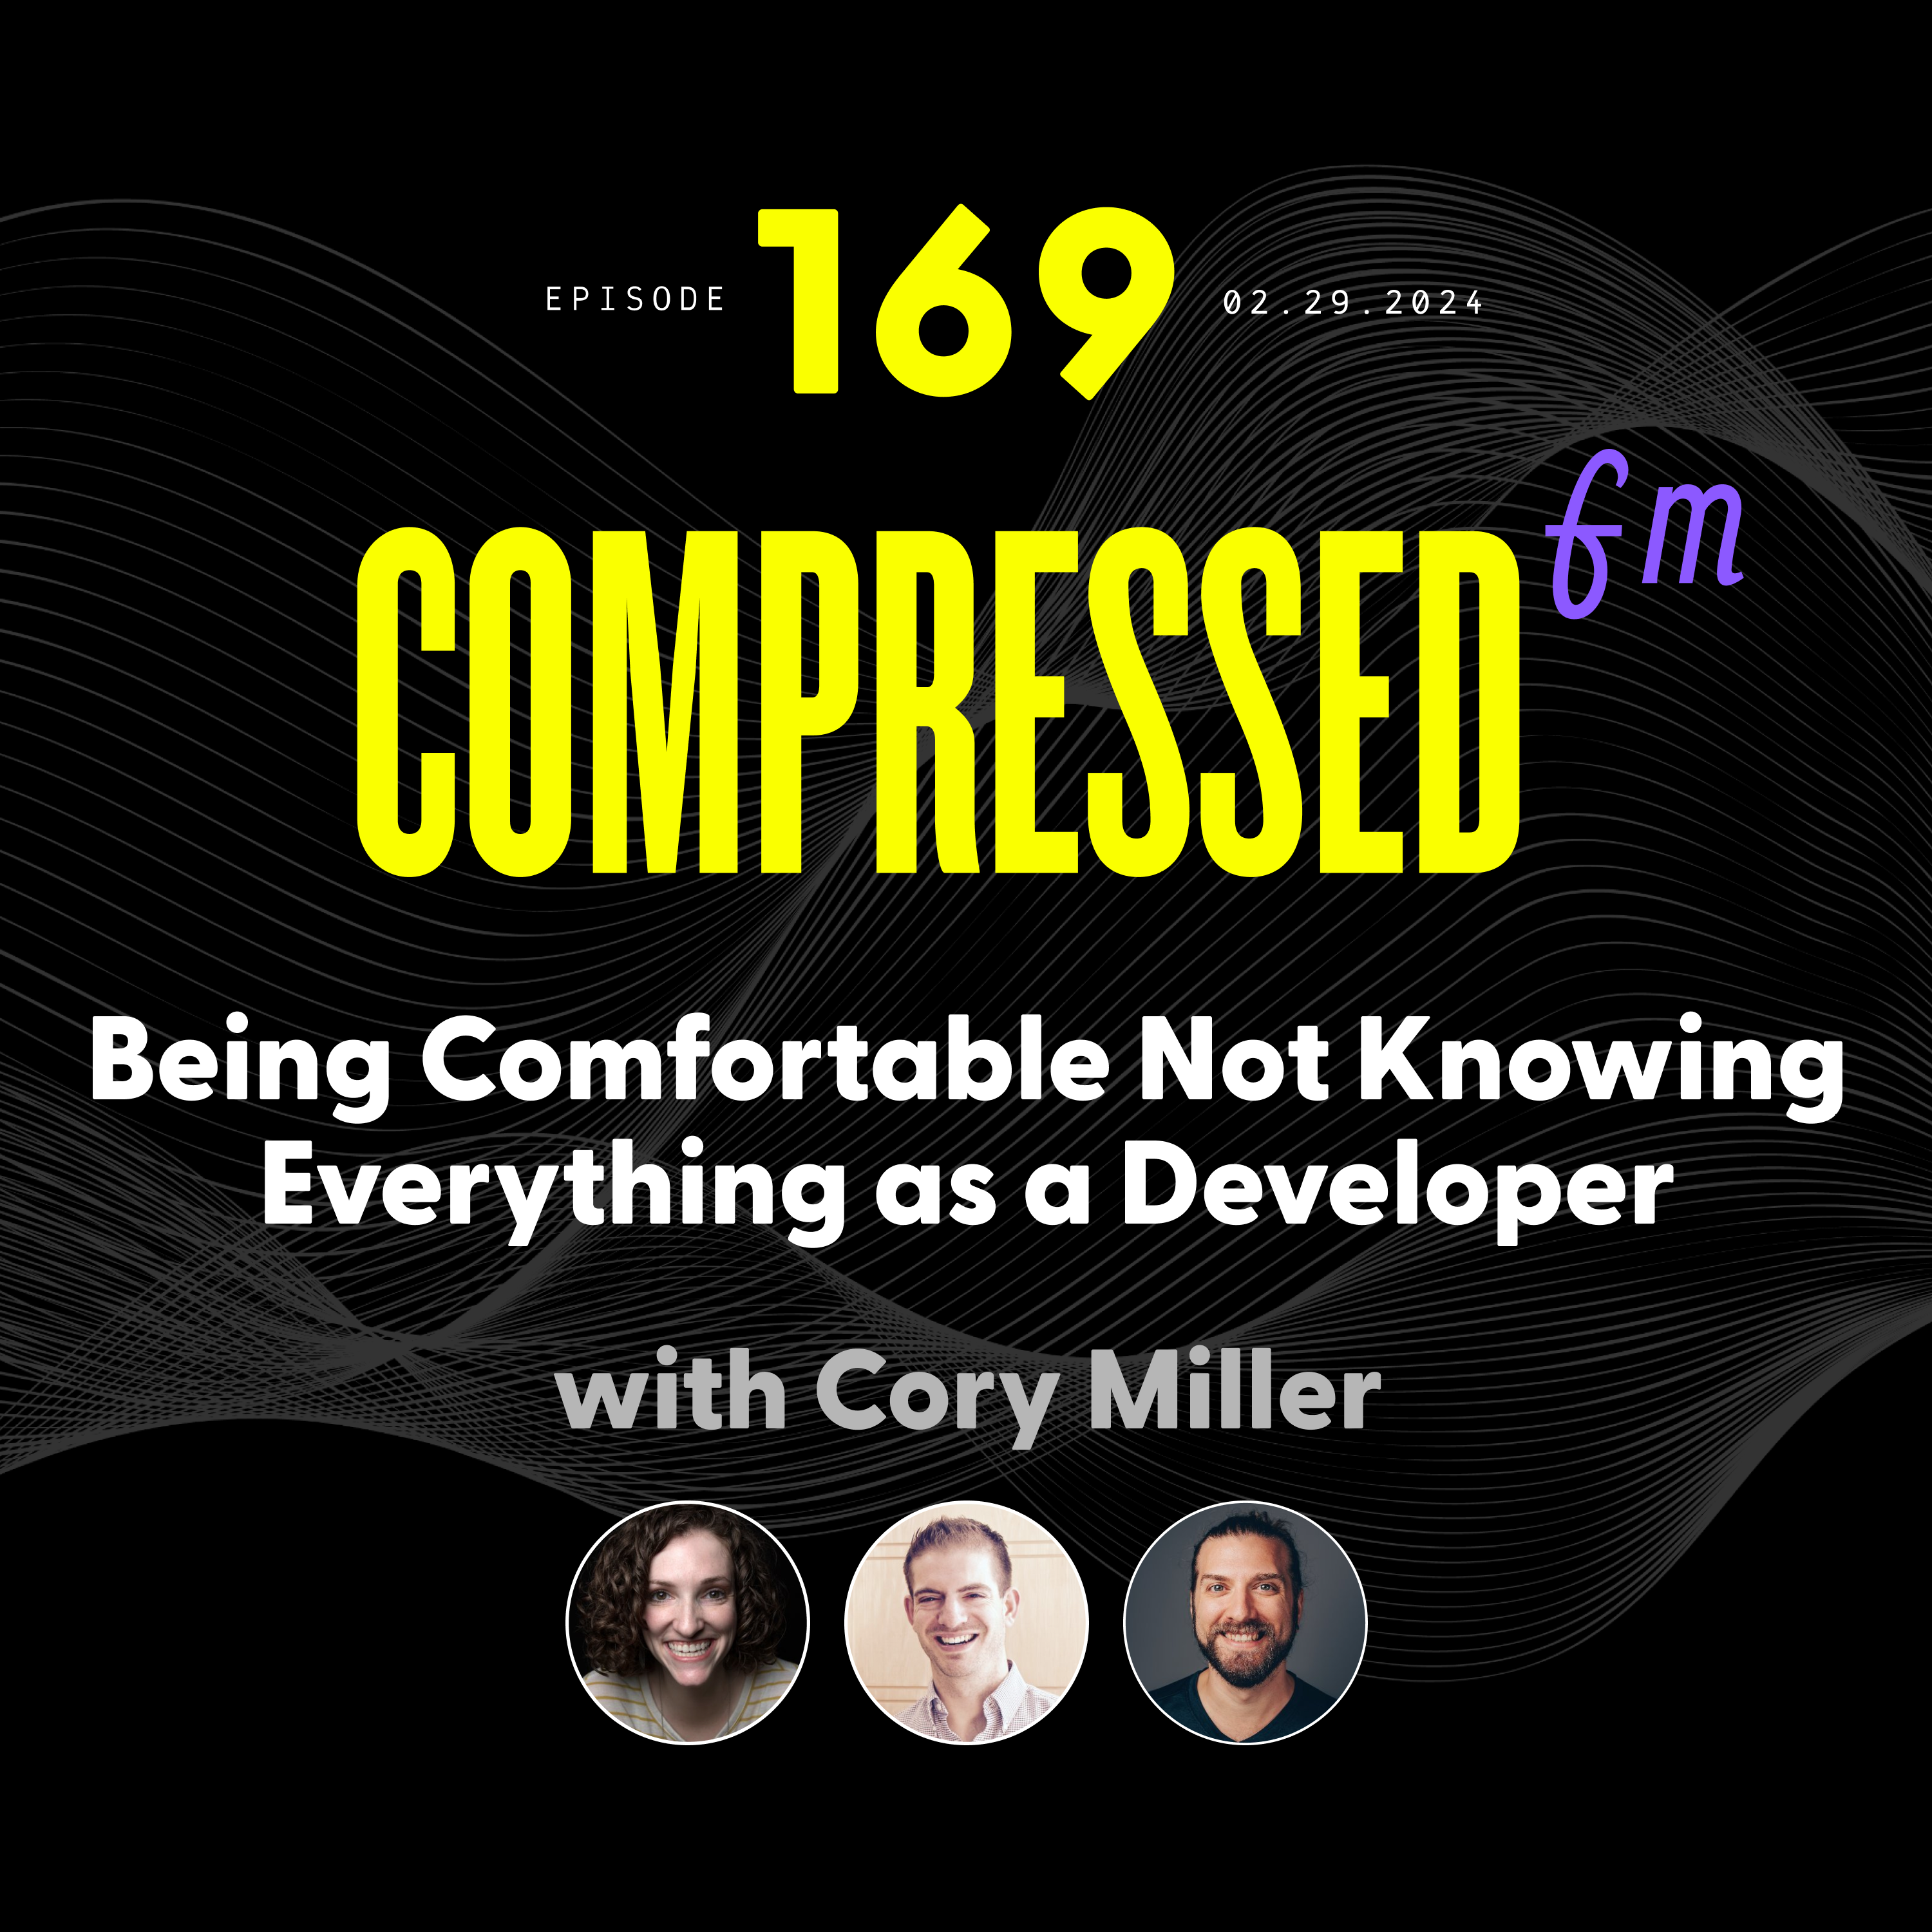 Being Comfortable Not Knowing Everything as a Developer